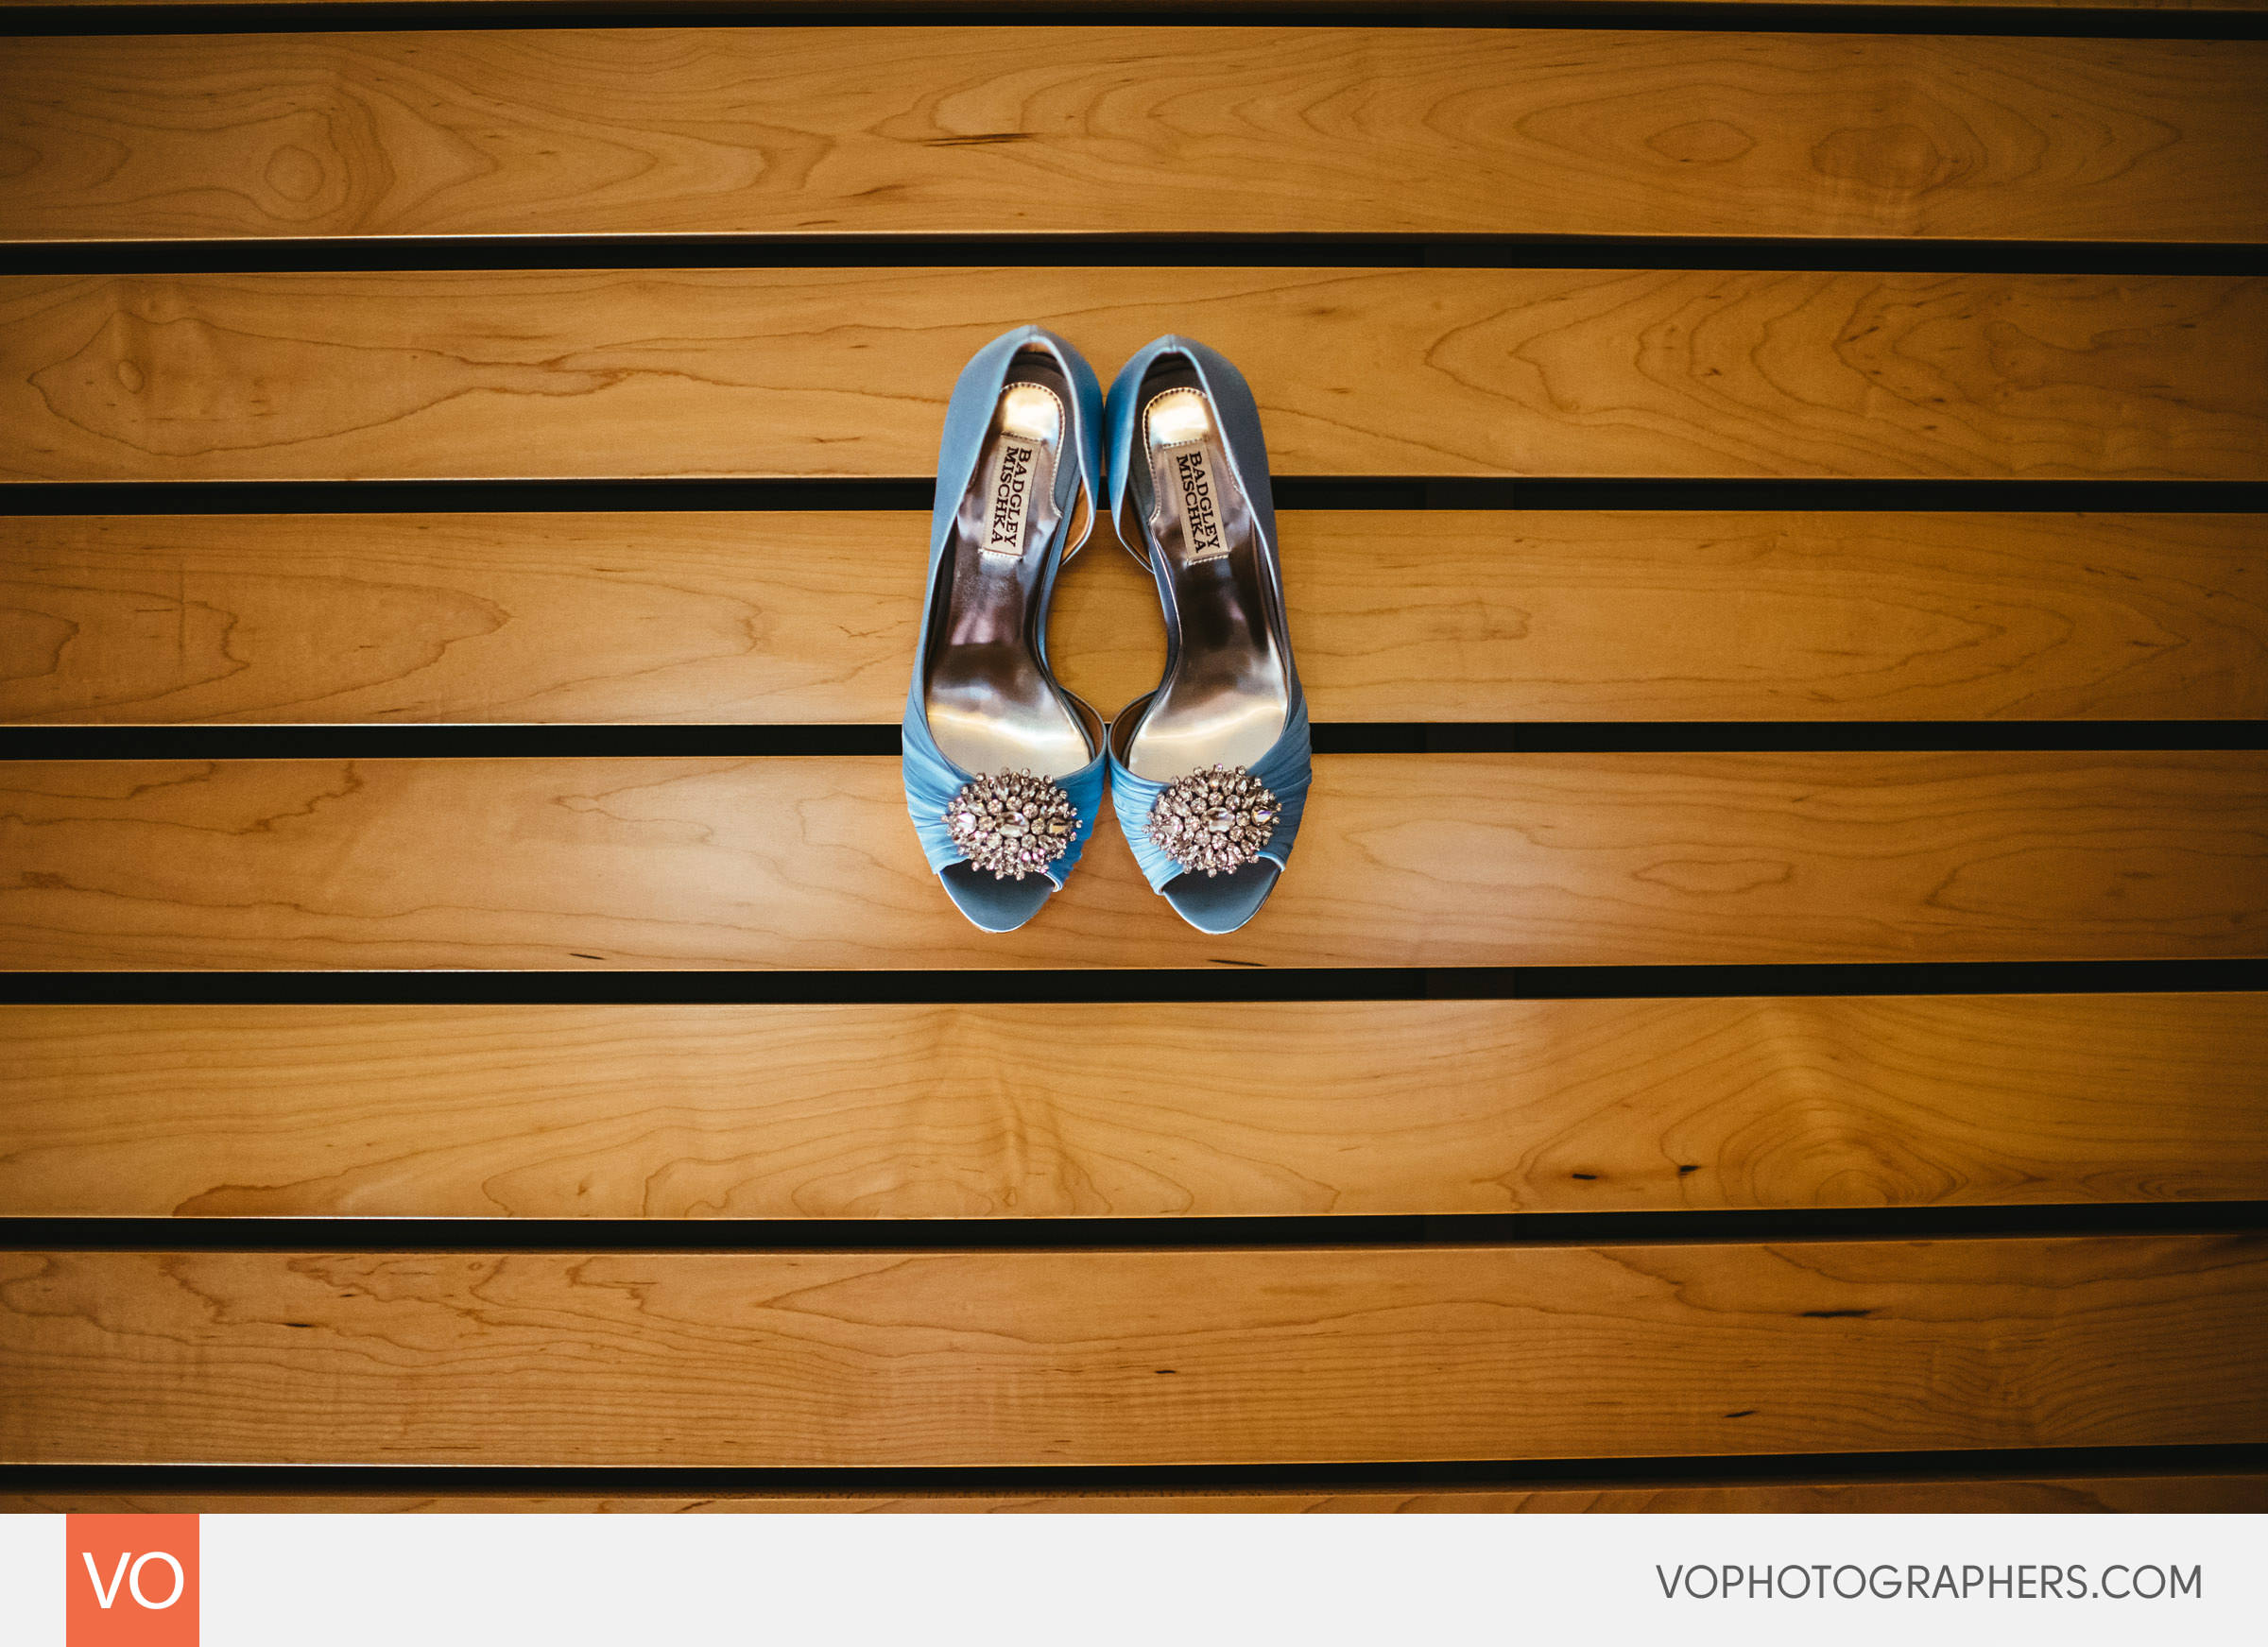 Bride's shoes hanging on bed headboard